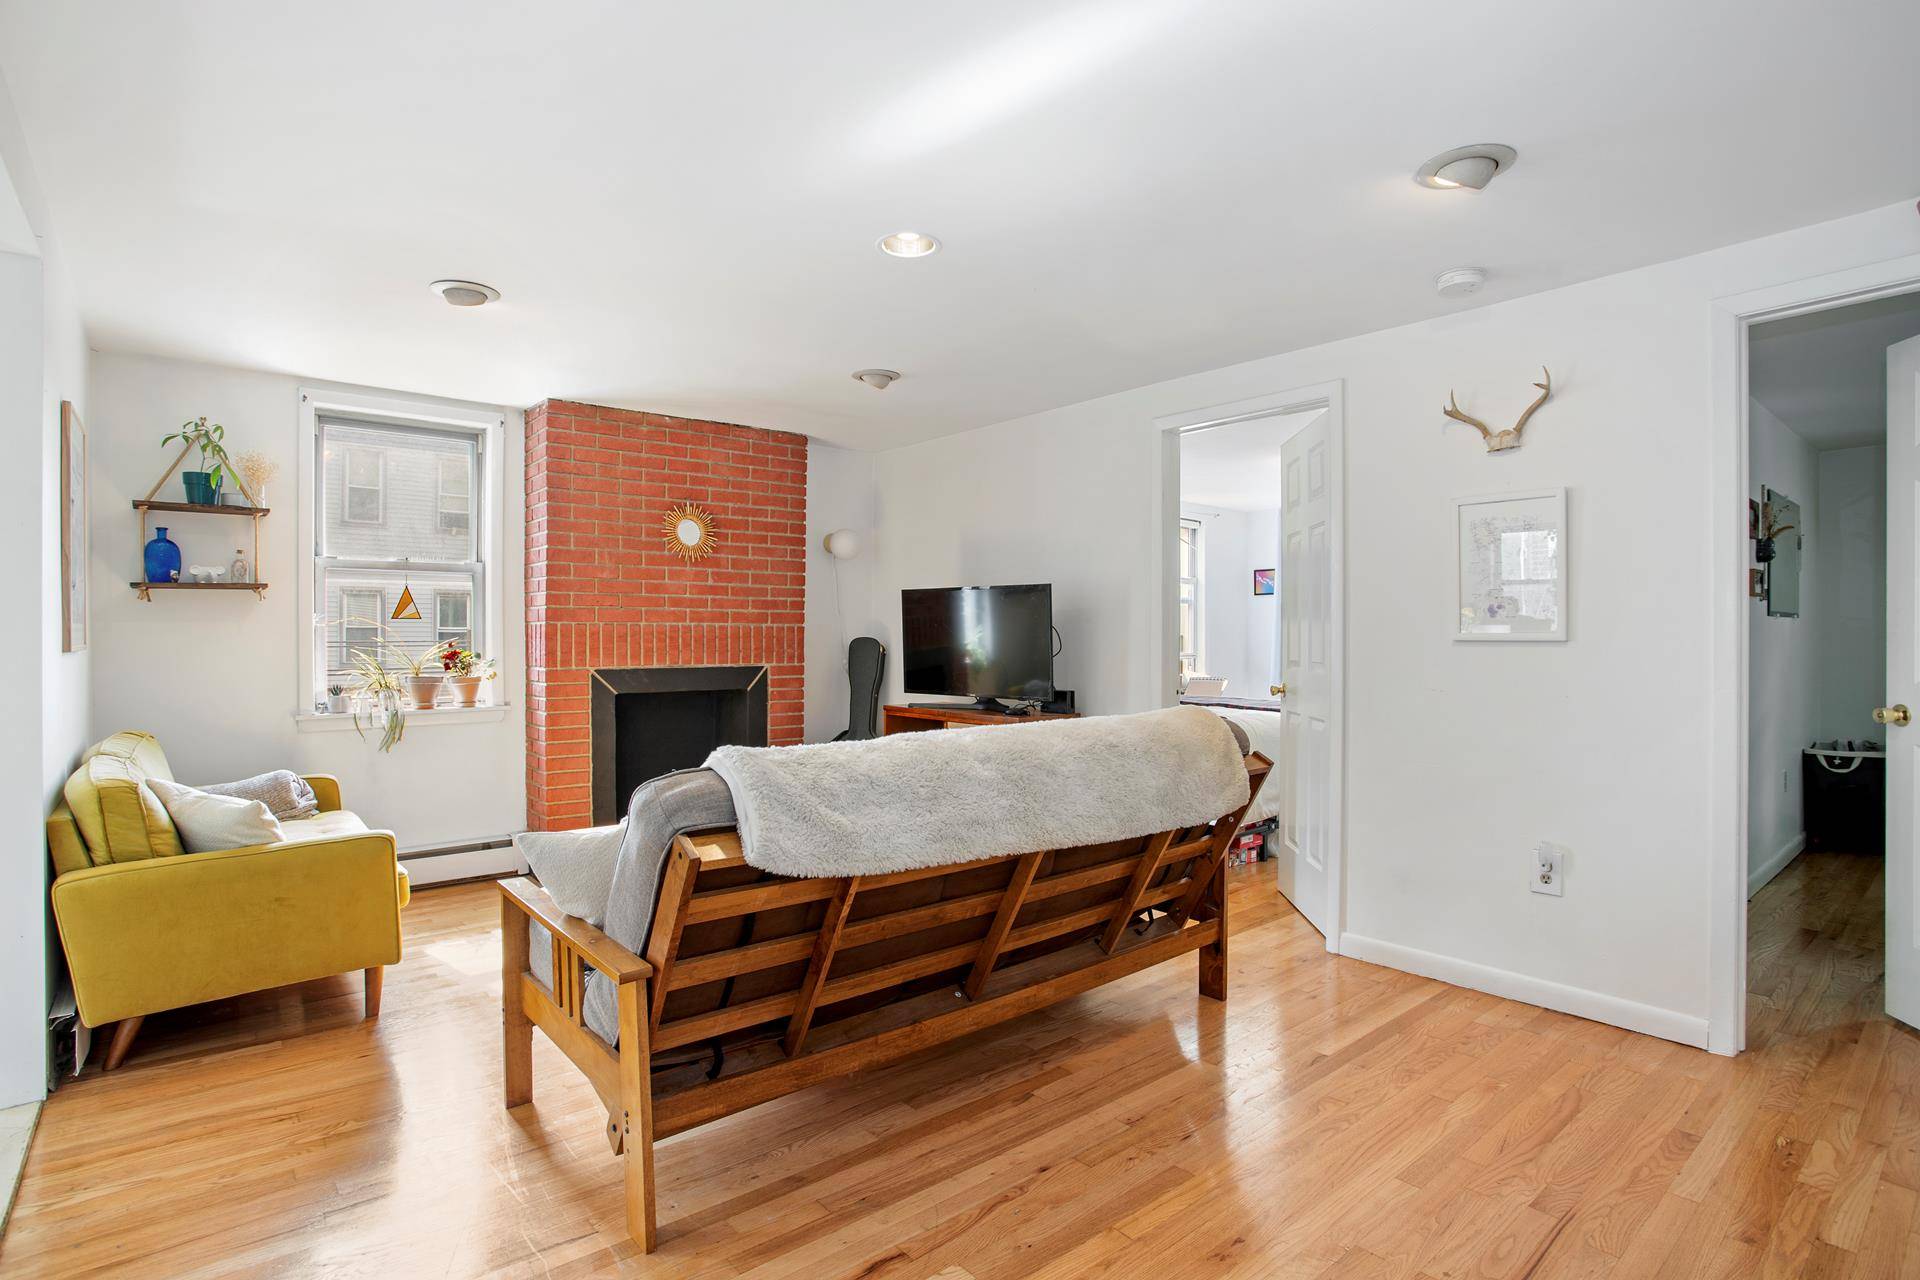 Spacious and bright 2 bedroom 1 bathroom apartment within close distance of the L and G trains Metropolitan Lorimer stop.